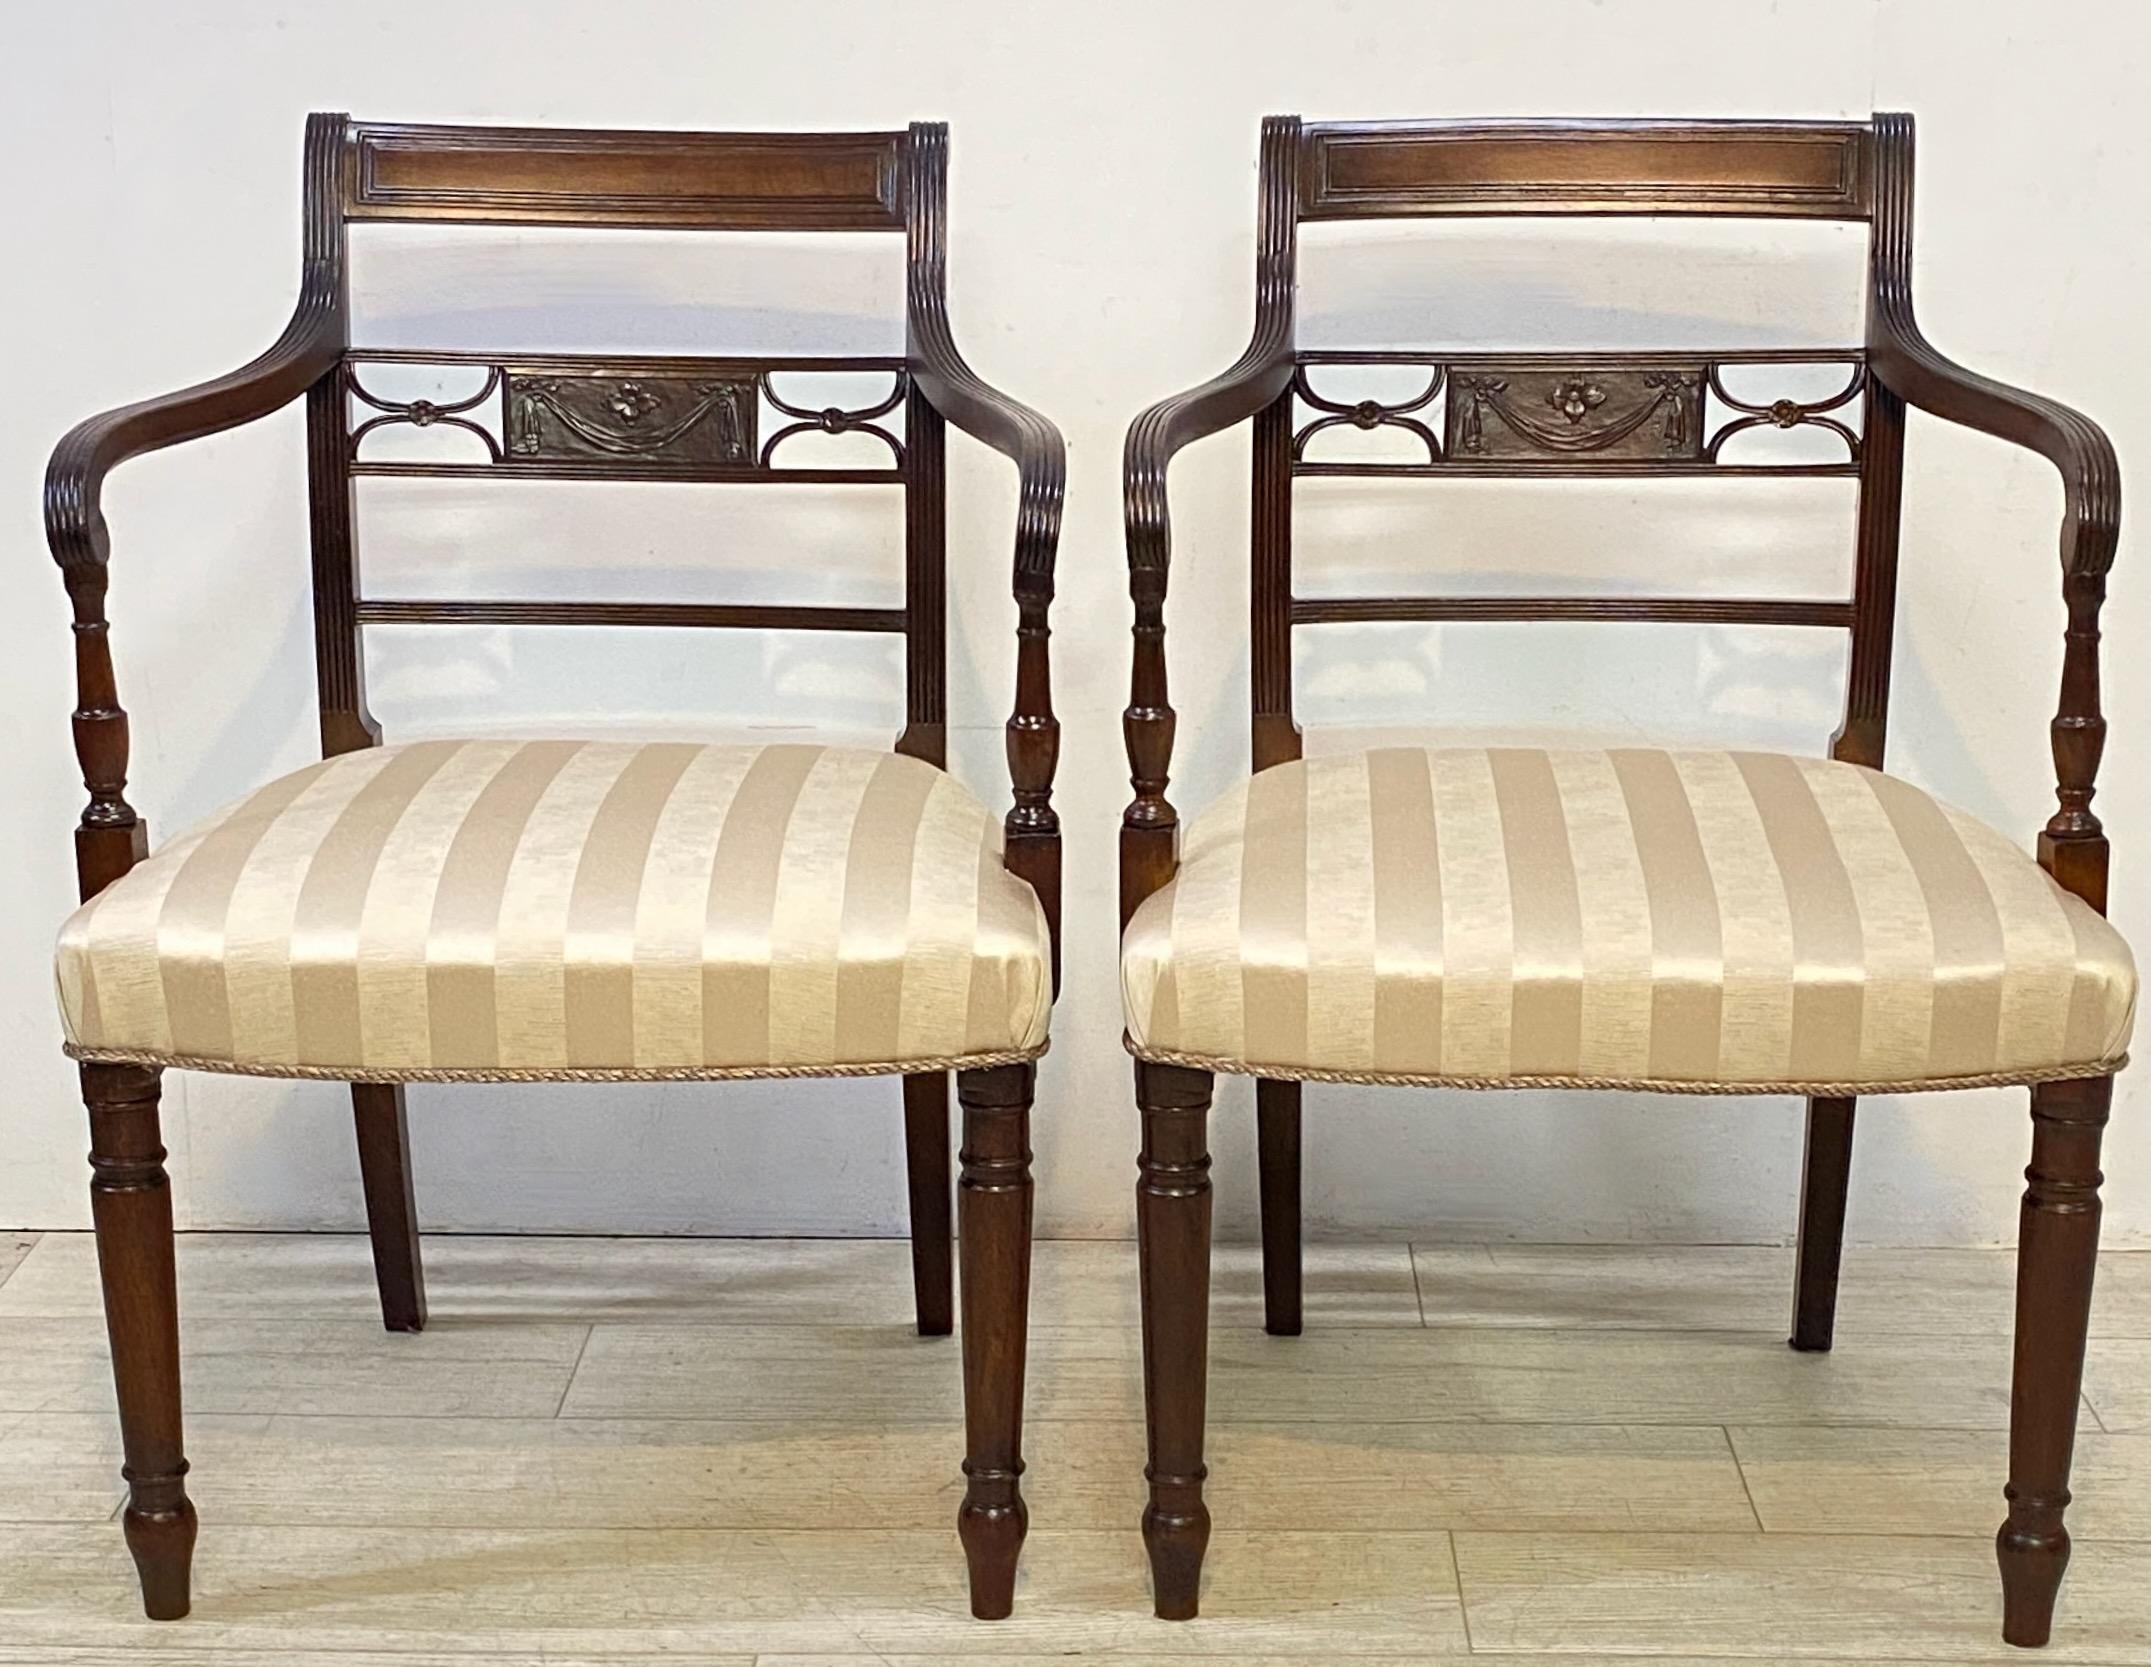 Set of 8 English George III Mahogany Dining Chairs, Early 19th Century In Good Condition For Sale In San Francisco, CA